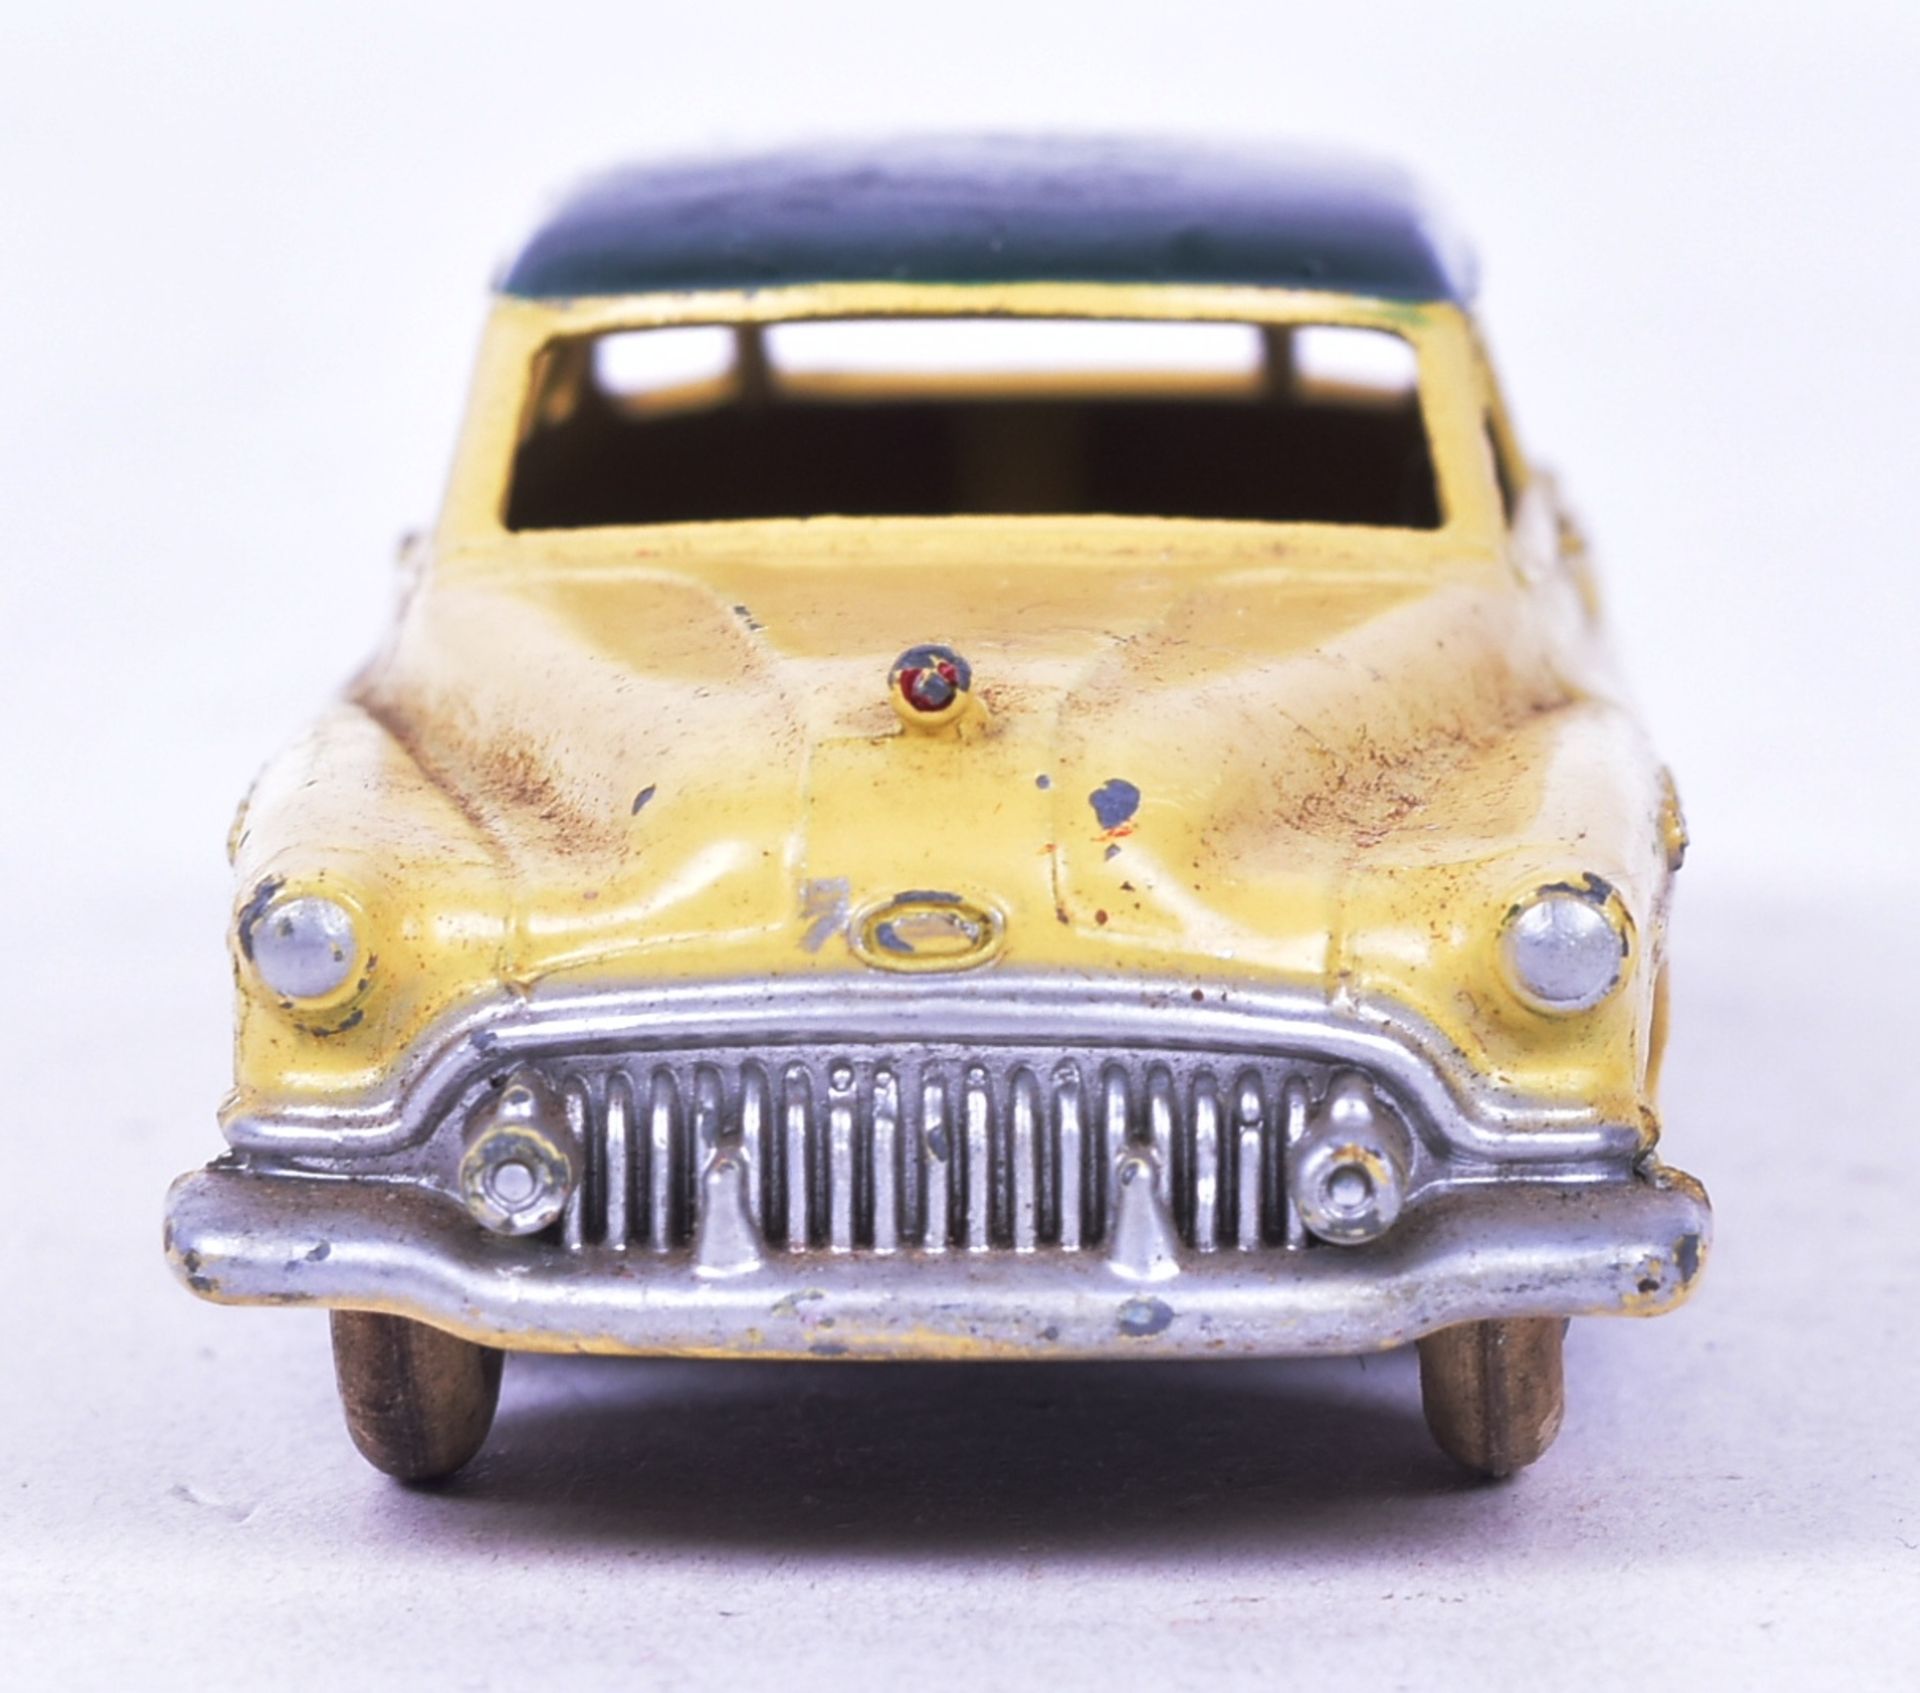 DIECAST - FRENCH DINKY TOYS - BUICK ROASMASTER - Image 4 of 5